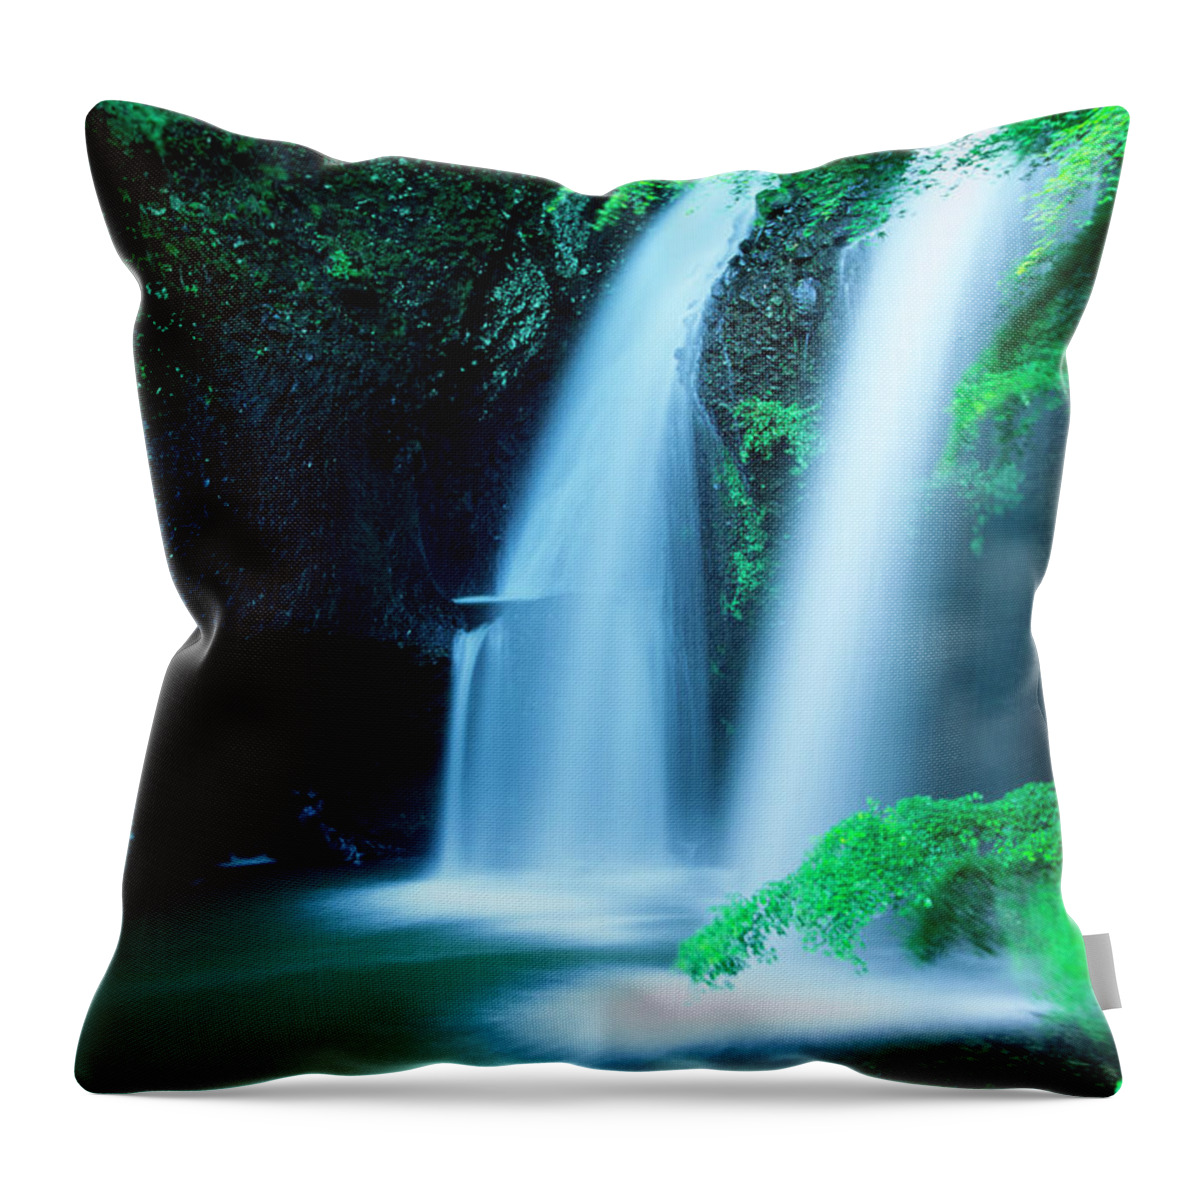 Scenics Throw Pillow featuring the photograph Japanese Waterfalls by Ooyoo